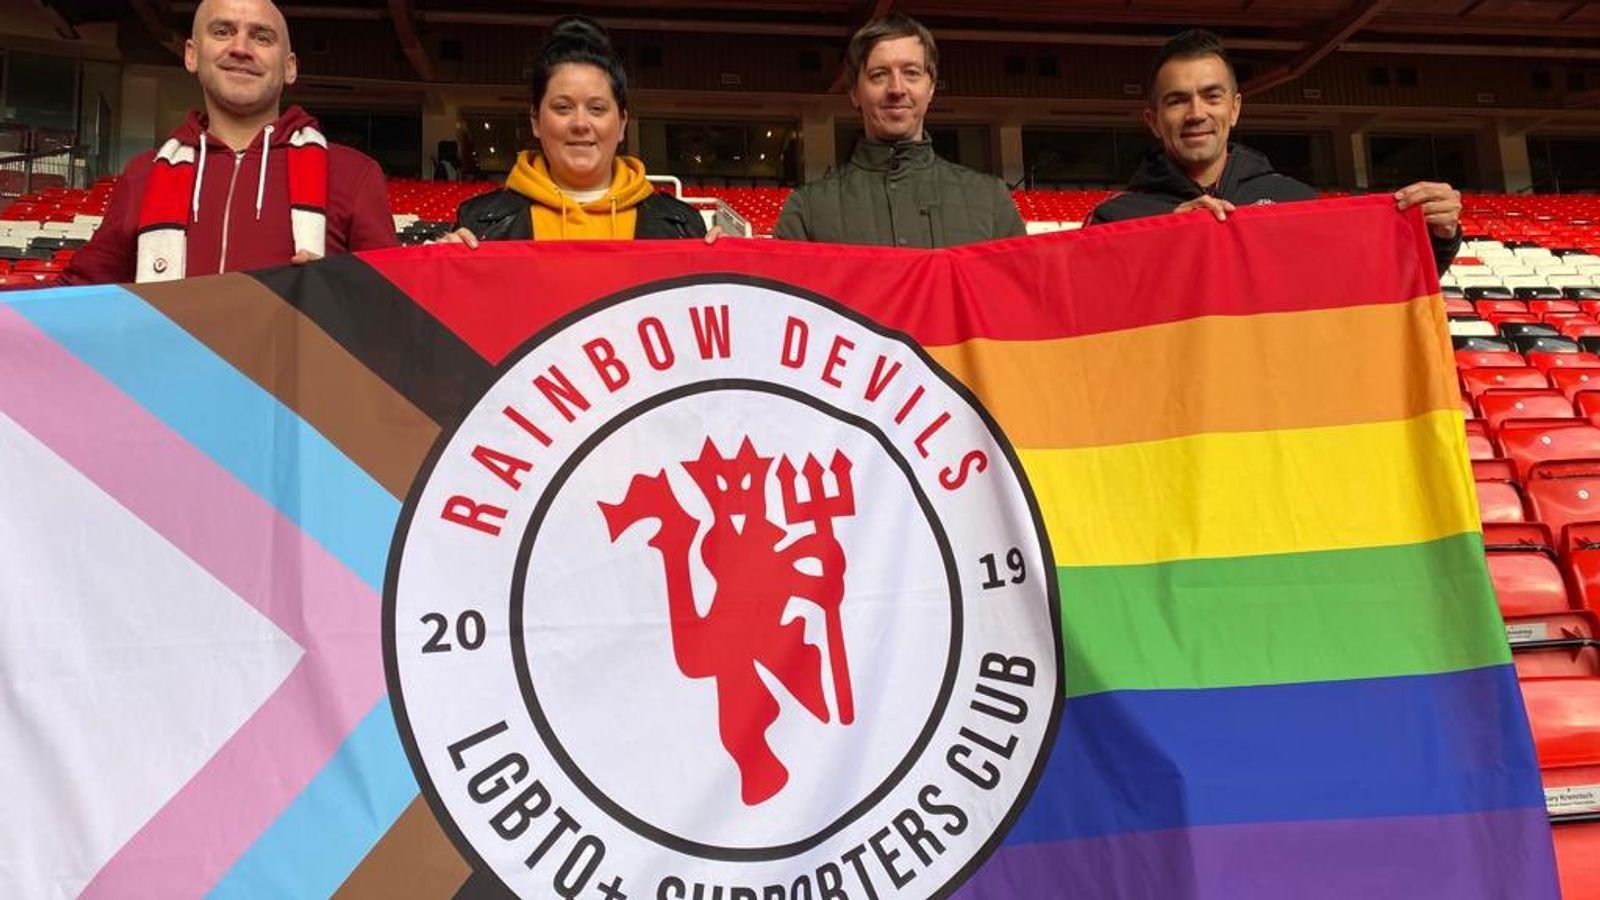 Premier League stars met with LGBTQ fan groups during Rainbow Laces -  Outsports